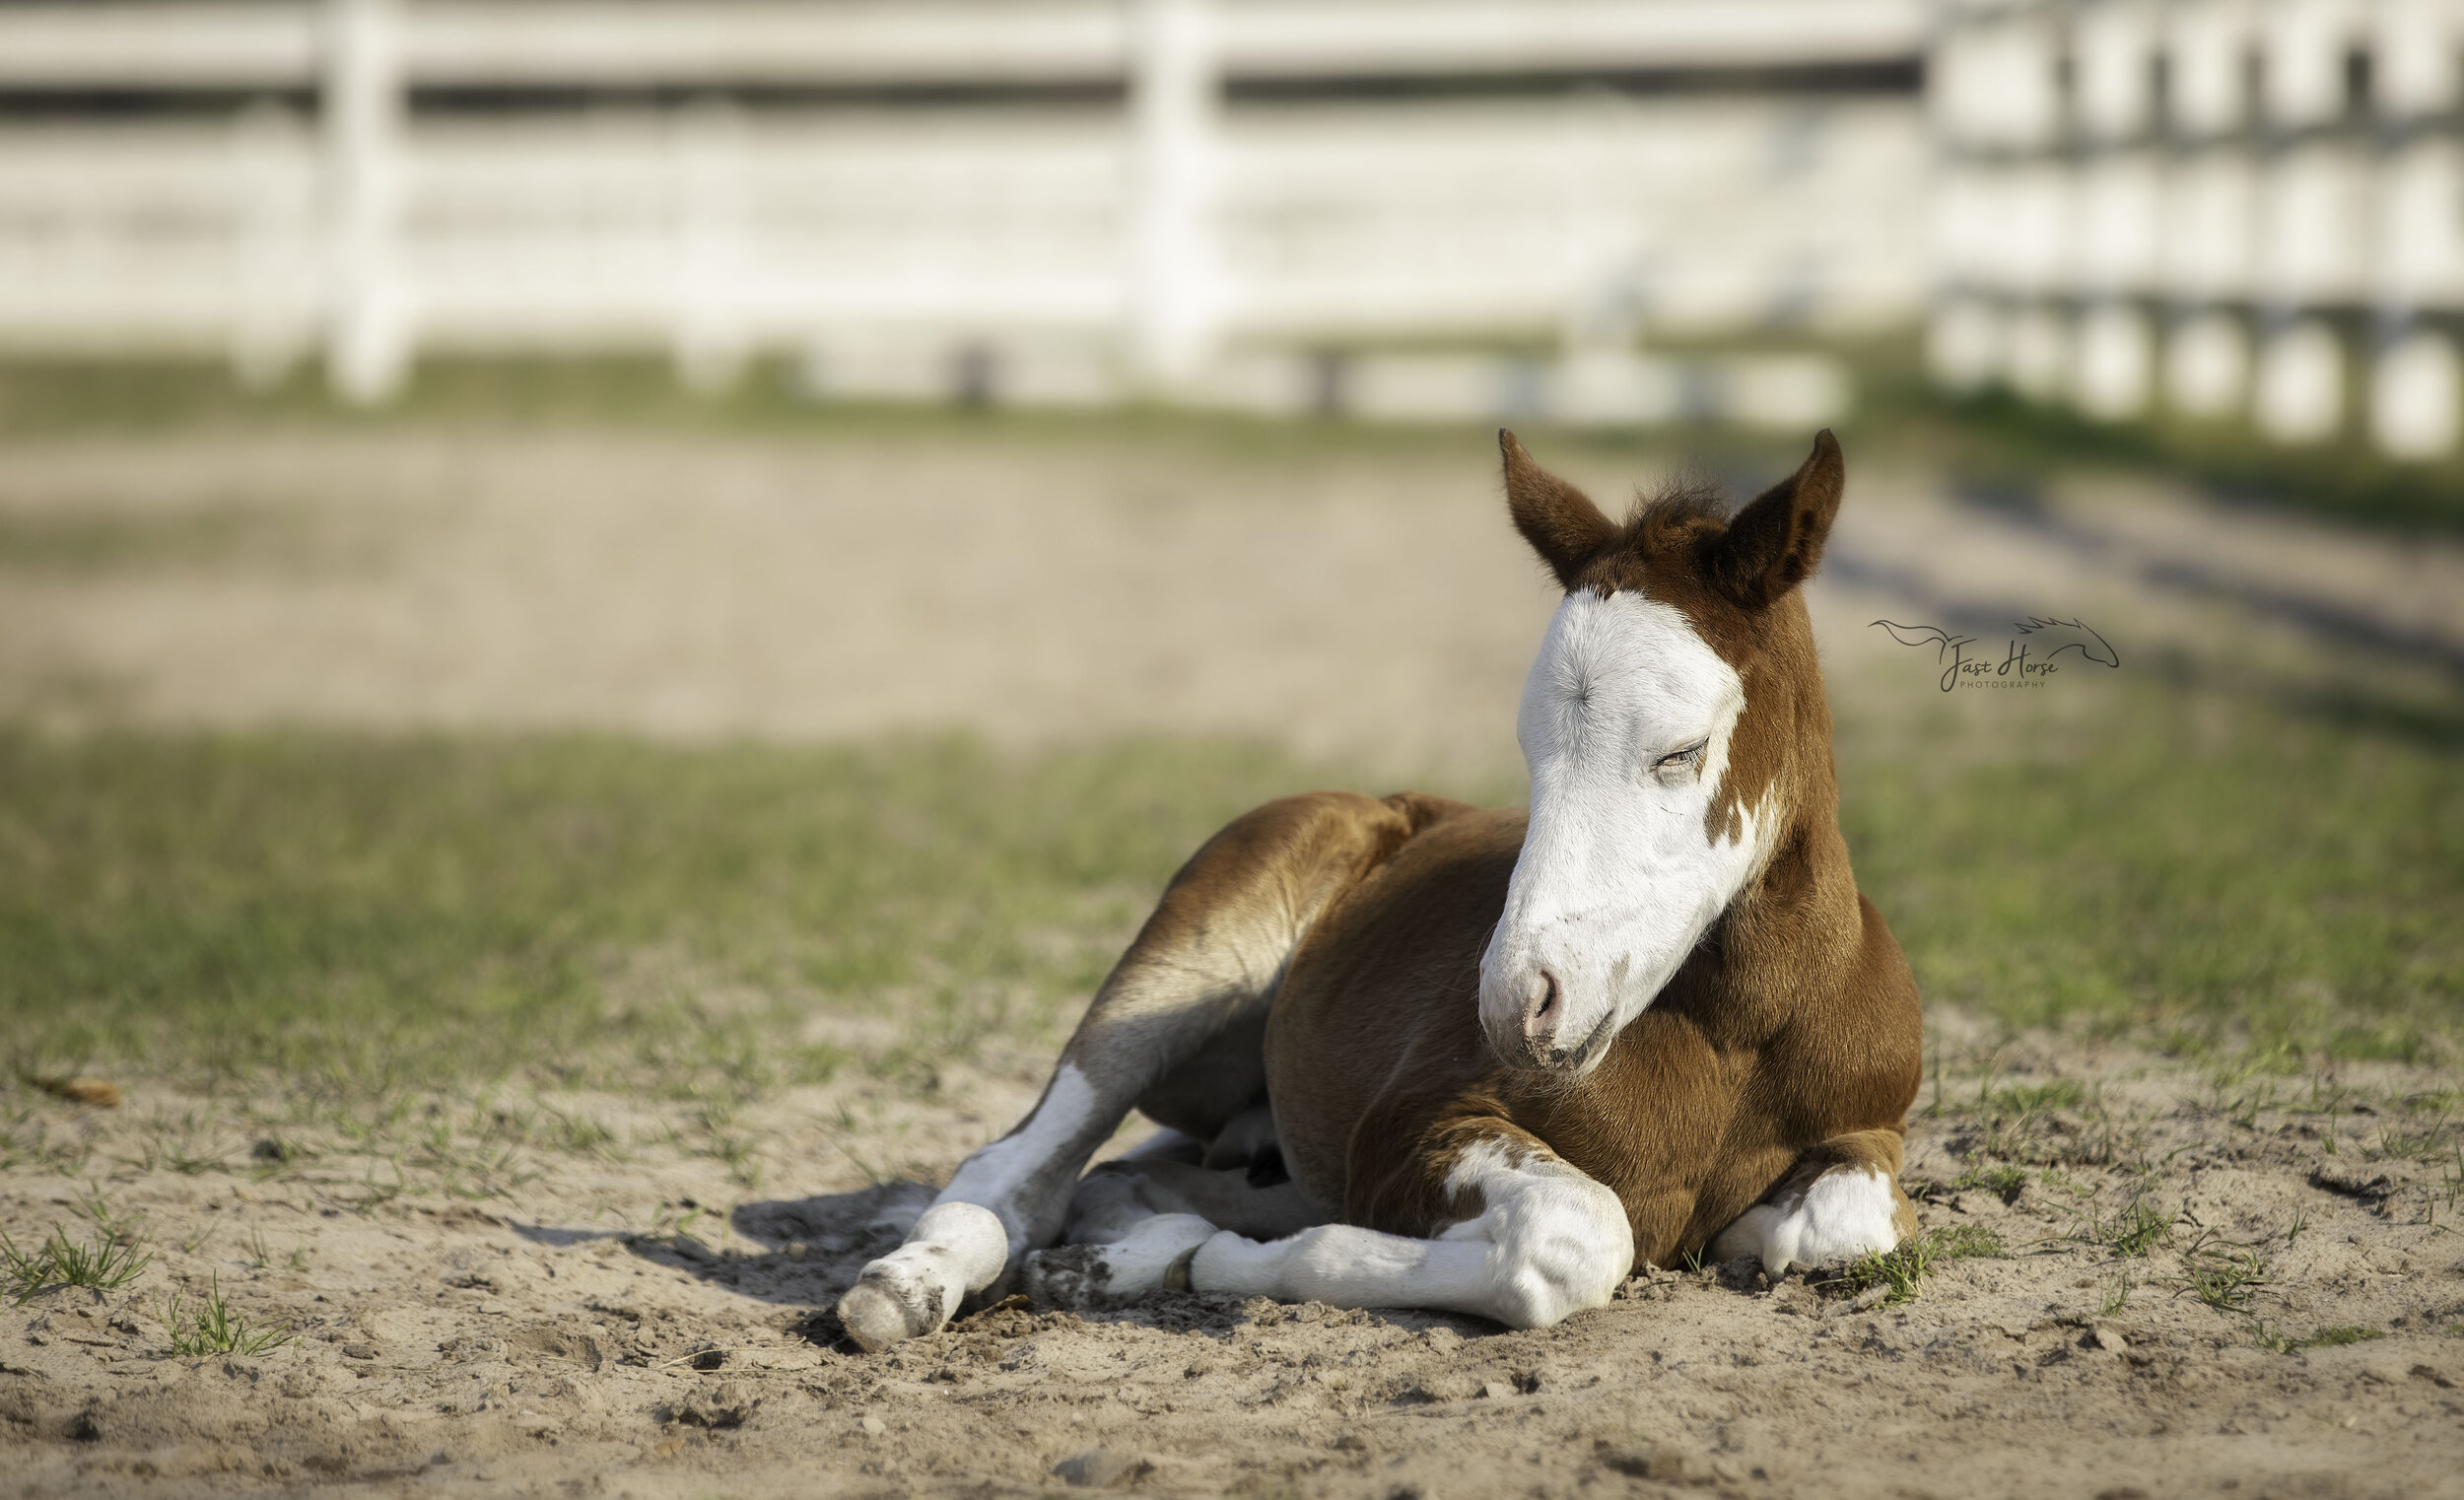 APHA_Foal_Colt_Florida_Fast Horse Photography_15.jpg